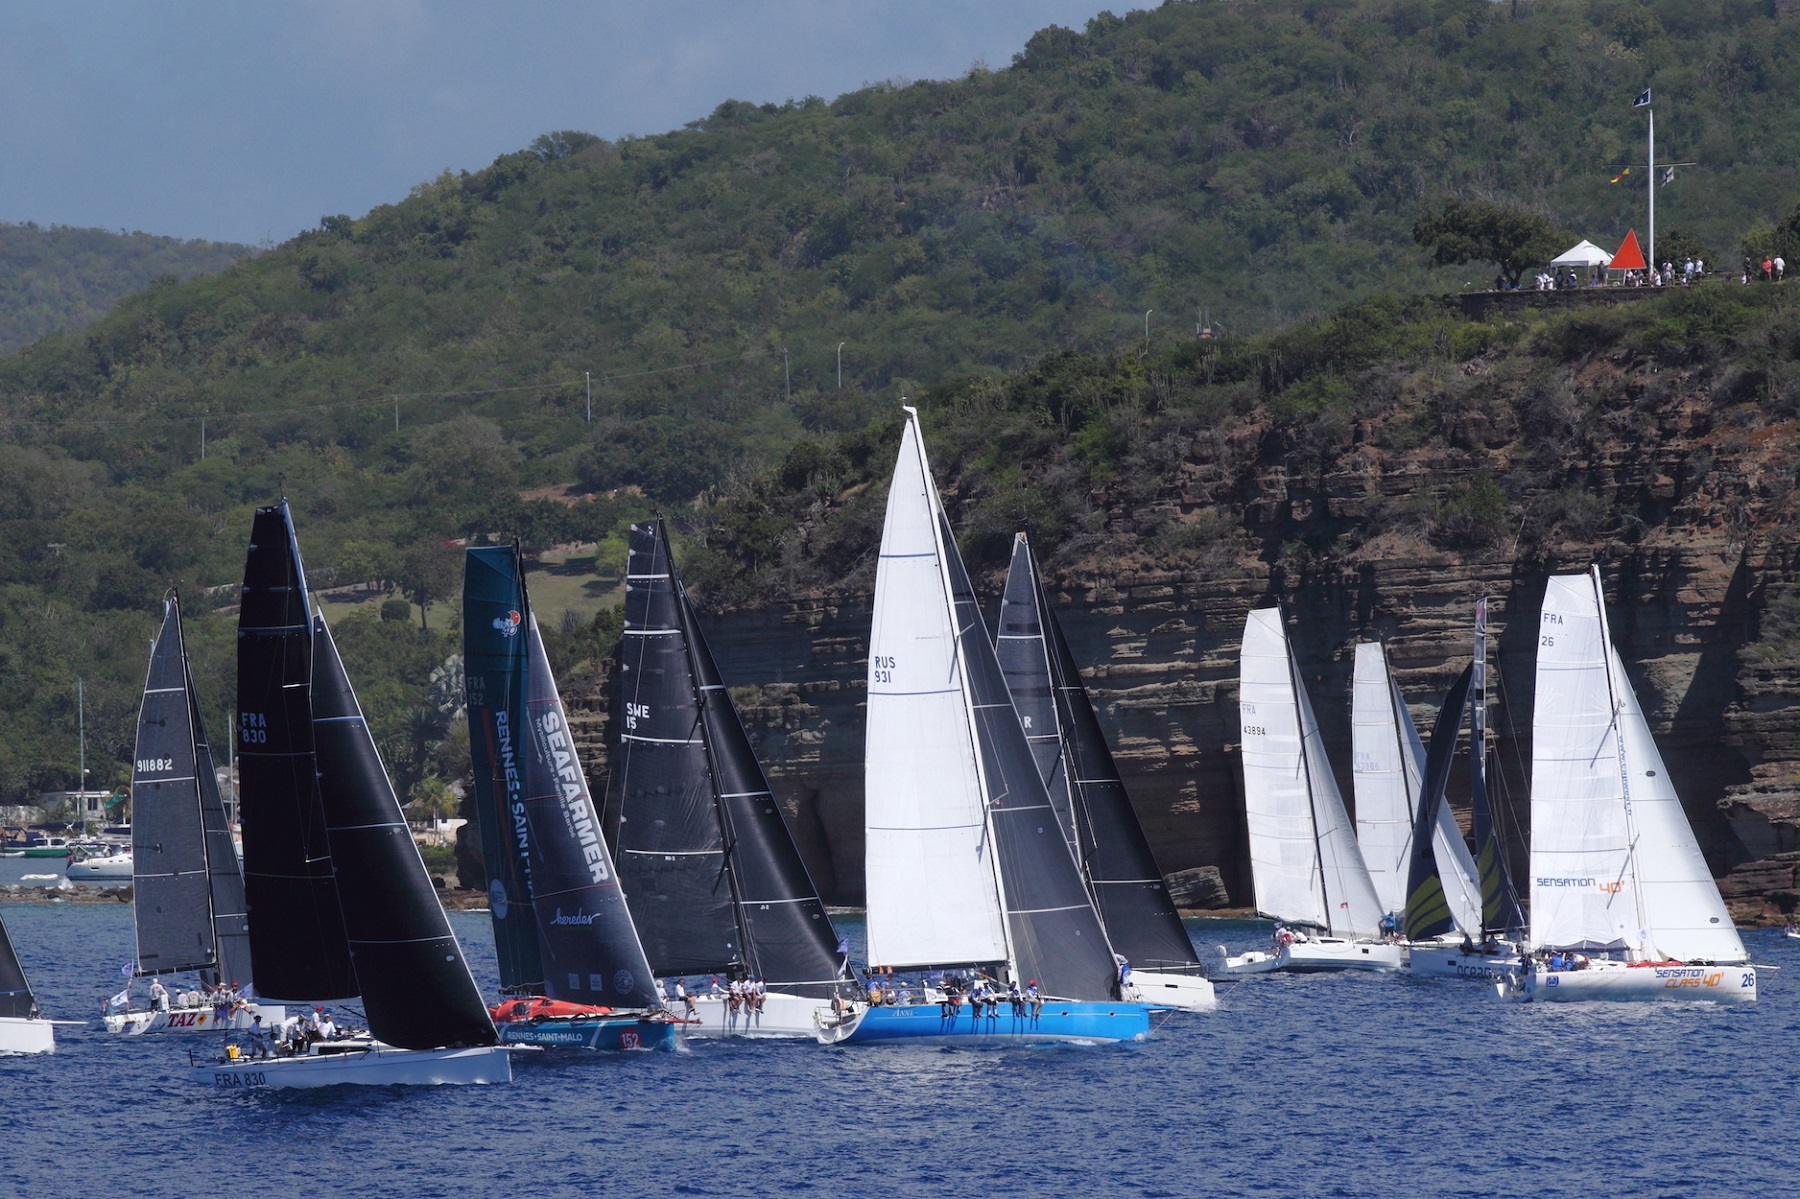 The entry list for the 2022 RORC Caribbean 600 is in good shape ahead of the start of the 600nm race from Antigua in February  © Tim Wright/Photoaction.com